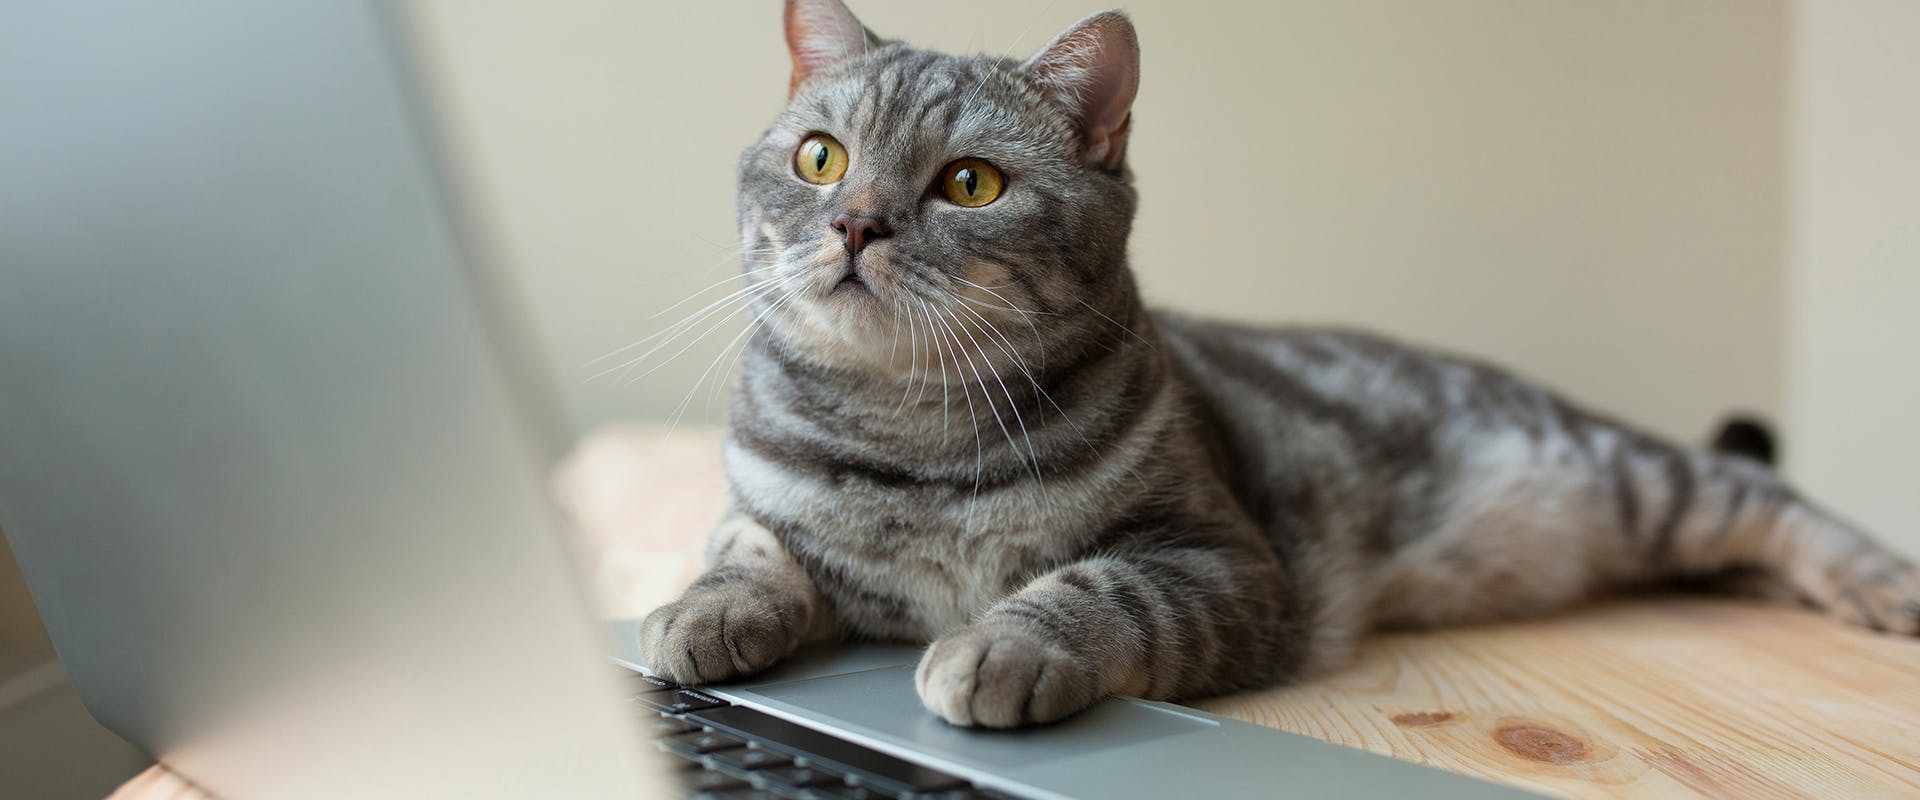 A cat sitting on a table with its paws resting on an open laptop